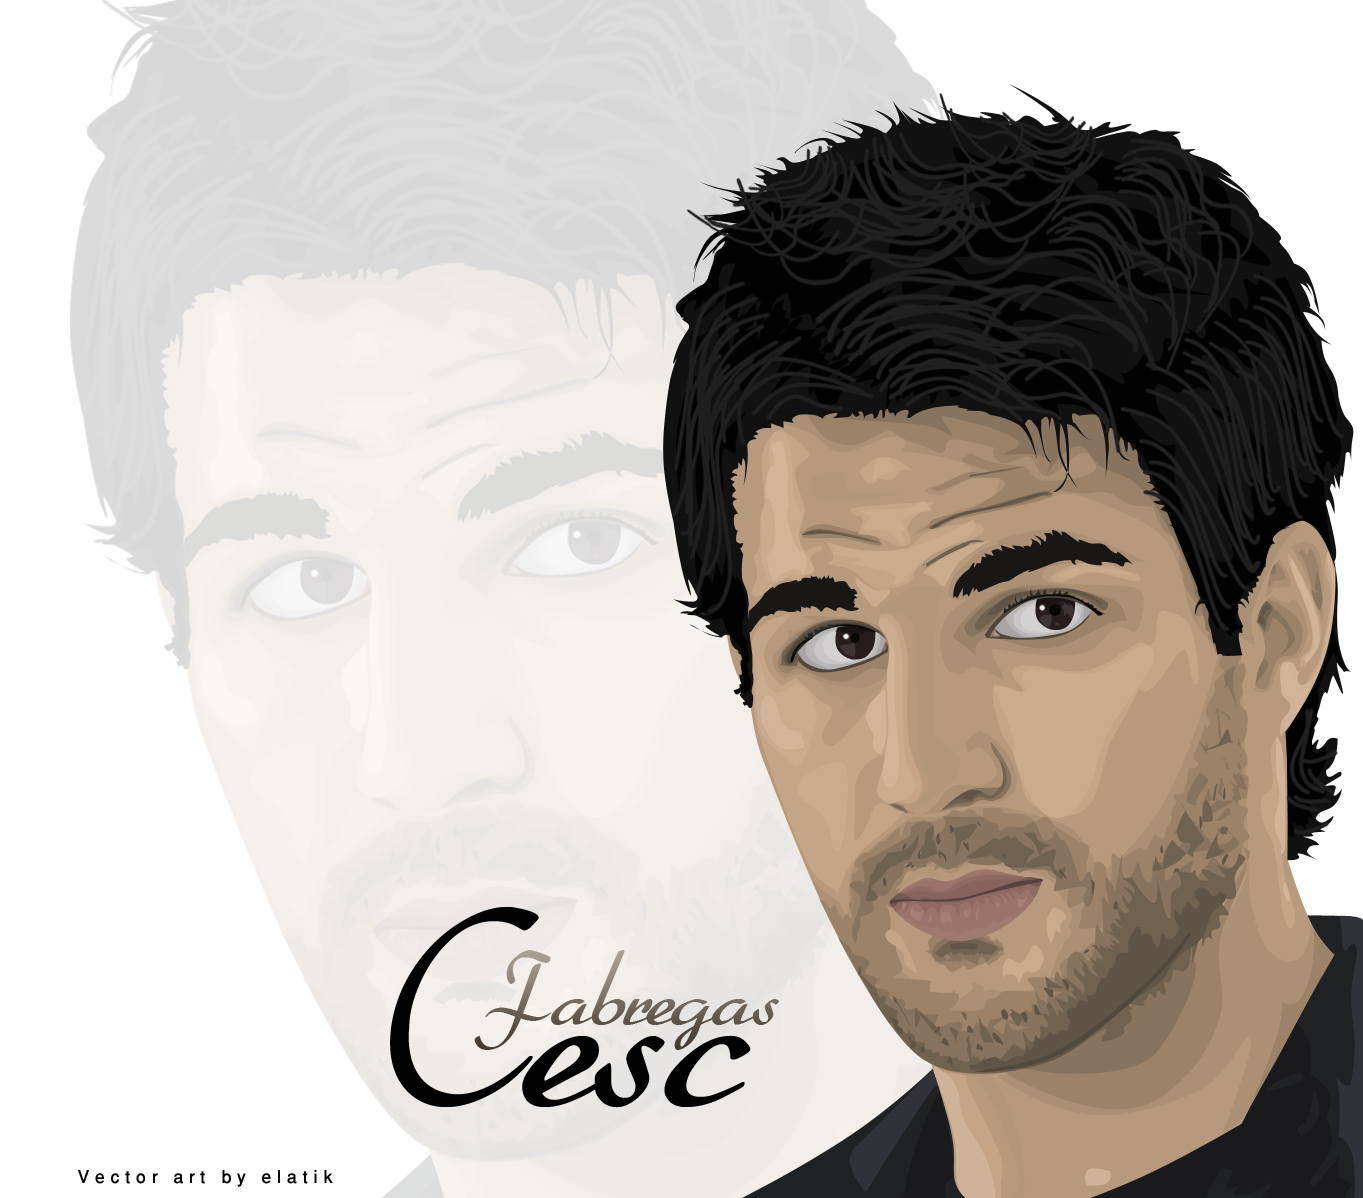 Free HD Chelsea FC Wallpaper: other wallpapers of Cesc Fabregas ...